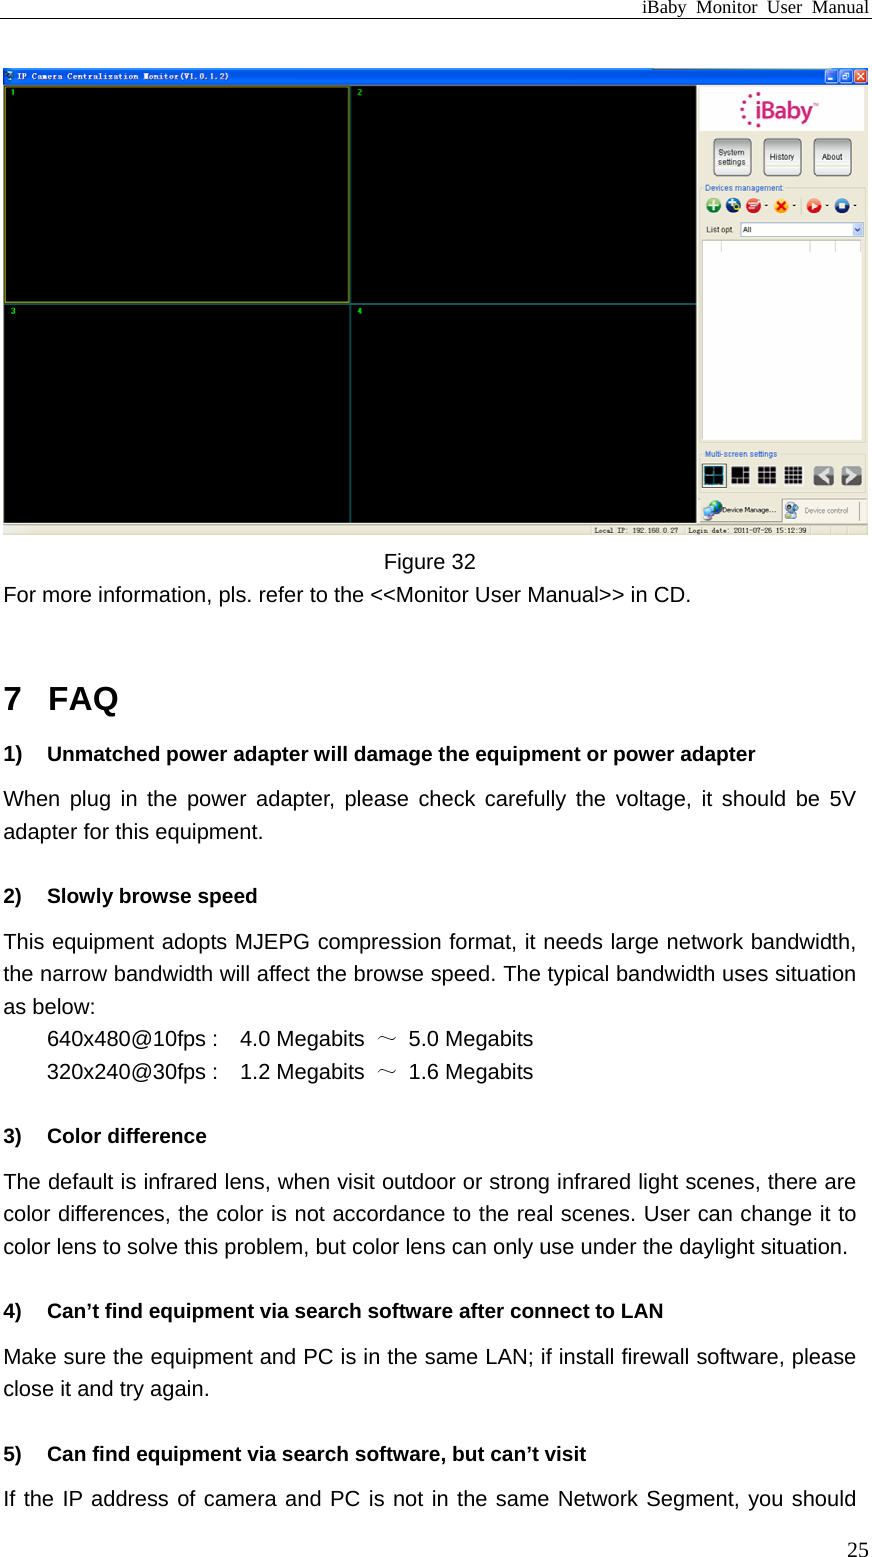 iBaby Monitor User Manual  Figure 32 For more information, pls. refer to the &lt;&lt;Monitor User Manual&gt;&gt; in CD.  7  FAQ 1)  Unmatched power adapter will damage the equipment or power adapter When plug in the power adapter, please check carefully the voltage, it should be 5V adapter for this equipment.  2)  Slowly browse speed This equipment adopts MJEPG compression format, it needs large network bandwidth, the narrow bandwidth will affect the browse speed. The typical bandwidth uses situation as below: 640x480@10fps :    4.0 Megabits  ～ 5.0 Megabits 320x240@30fps :    1.2 Megabits  ～ 1.6 Megabits  3) Color difference  The default is infrared lens, when visit outdoor or strong infrared light scenes, there are color differences, the color is not accordance to the real scenes. User can change it to color lens to solve this problem, but color lens can only use under the daylight situation.  4)  Can’t find equipment via search software after connect to LAN Make sure the equipment and PC is in the same LAN; if install firewall software, please close it and try again.  5)  Can find equipment via search software, but can’t visit If the IP address of camera and PC is not in the same Network Segment, you should  25